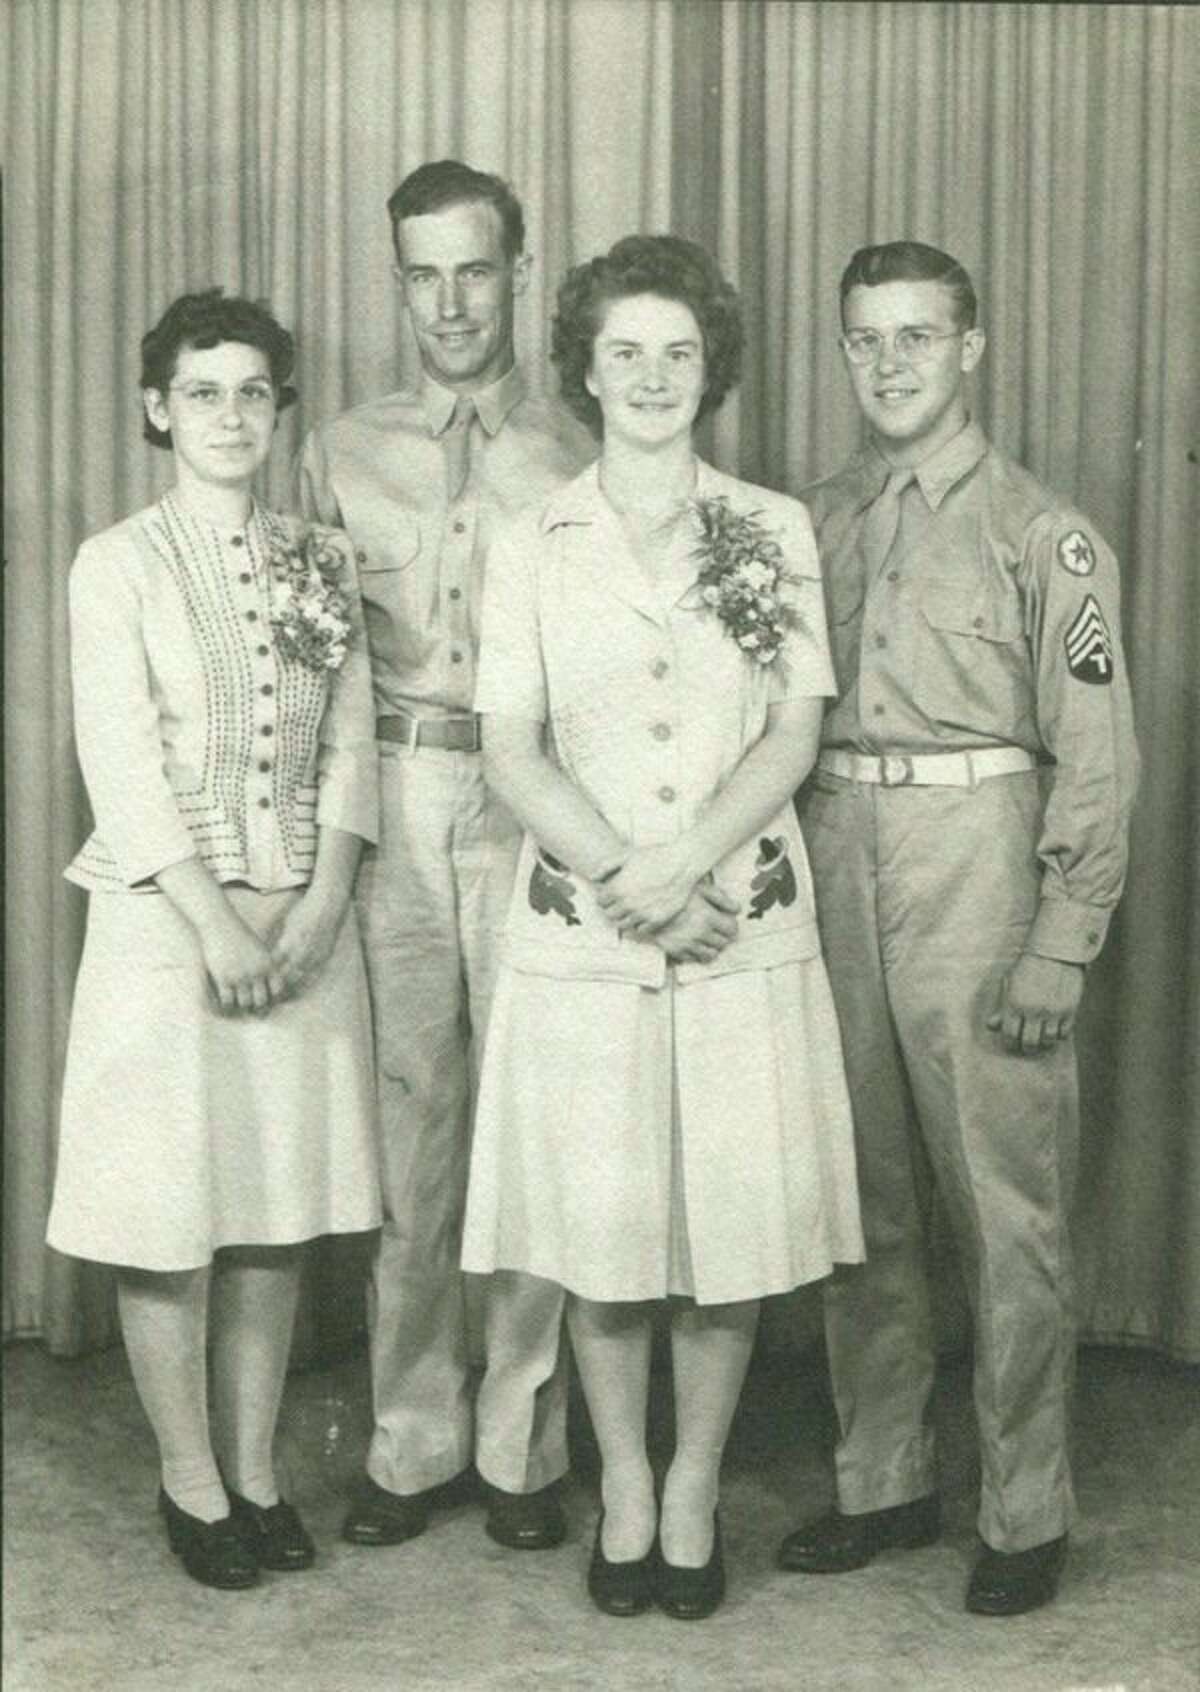 On July 15, 1944, Bob Moe and Mildred Horning were married in the First Baptist Church in Midland. In the photo from left are Clara Penney (Bob's sister), Lloyd Mudd, bride Mildred Horning and groom Bob Moe. Three days later, Bob was back in Pomona, California with his battalion.